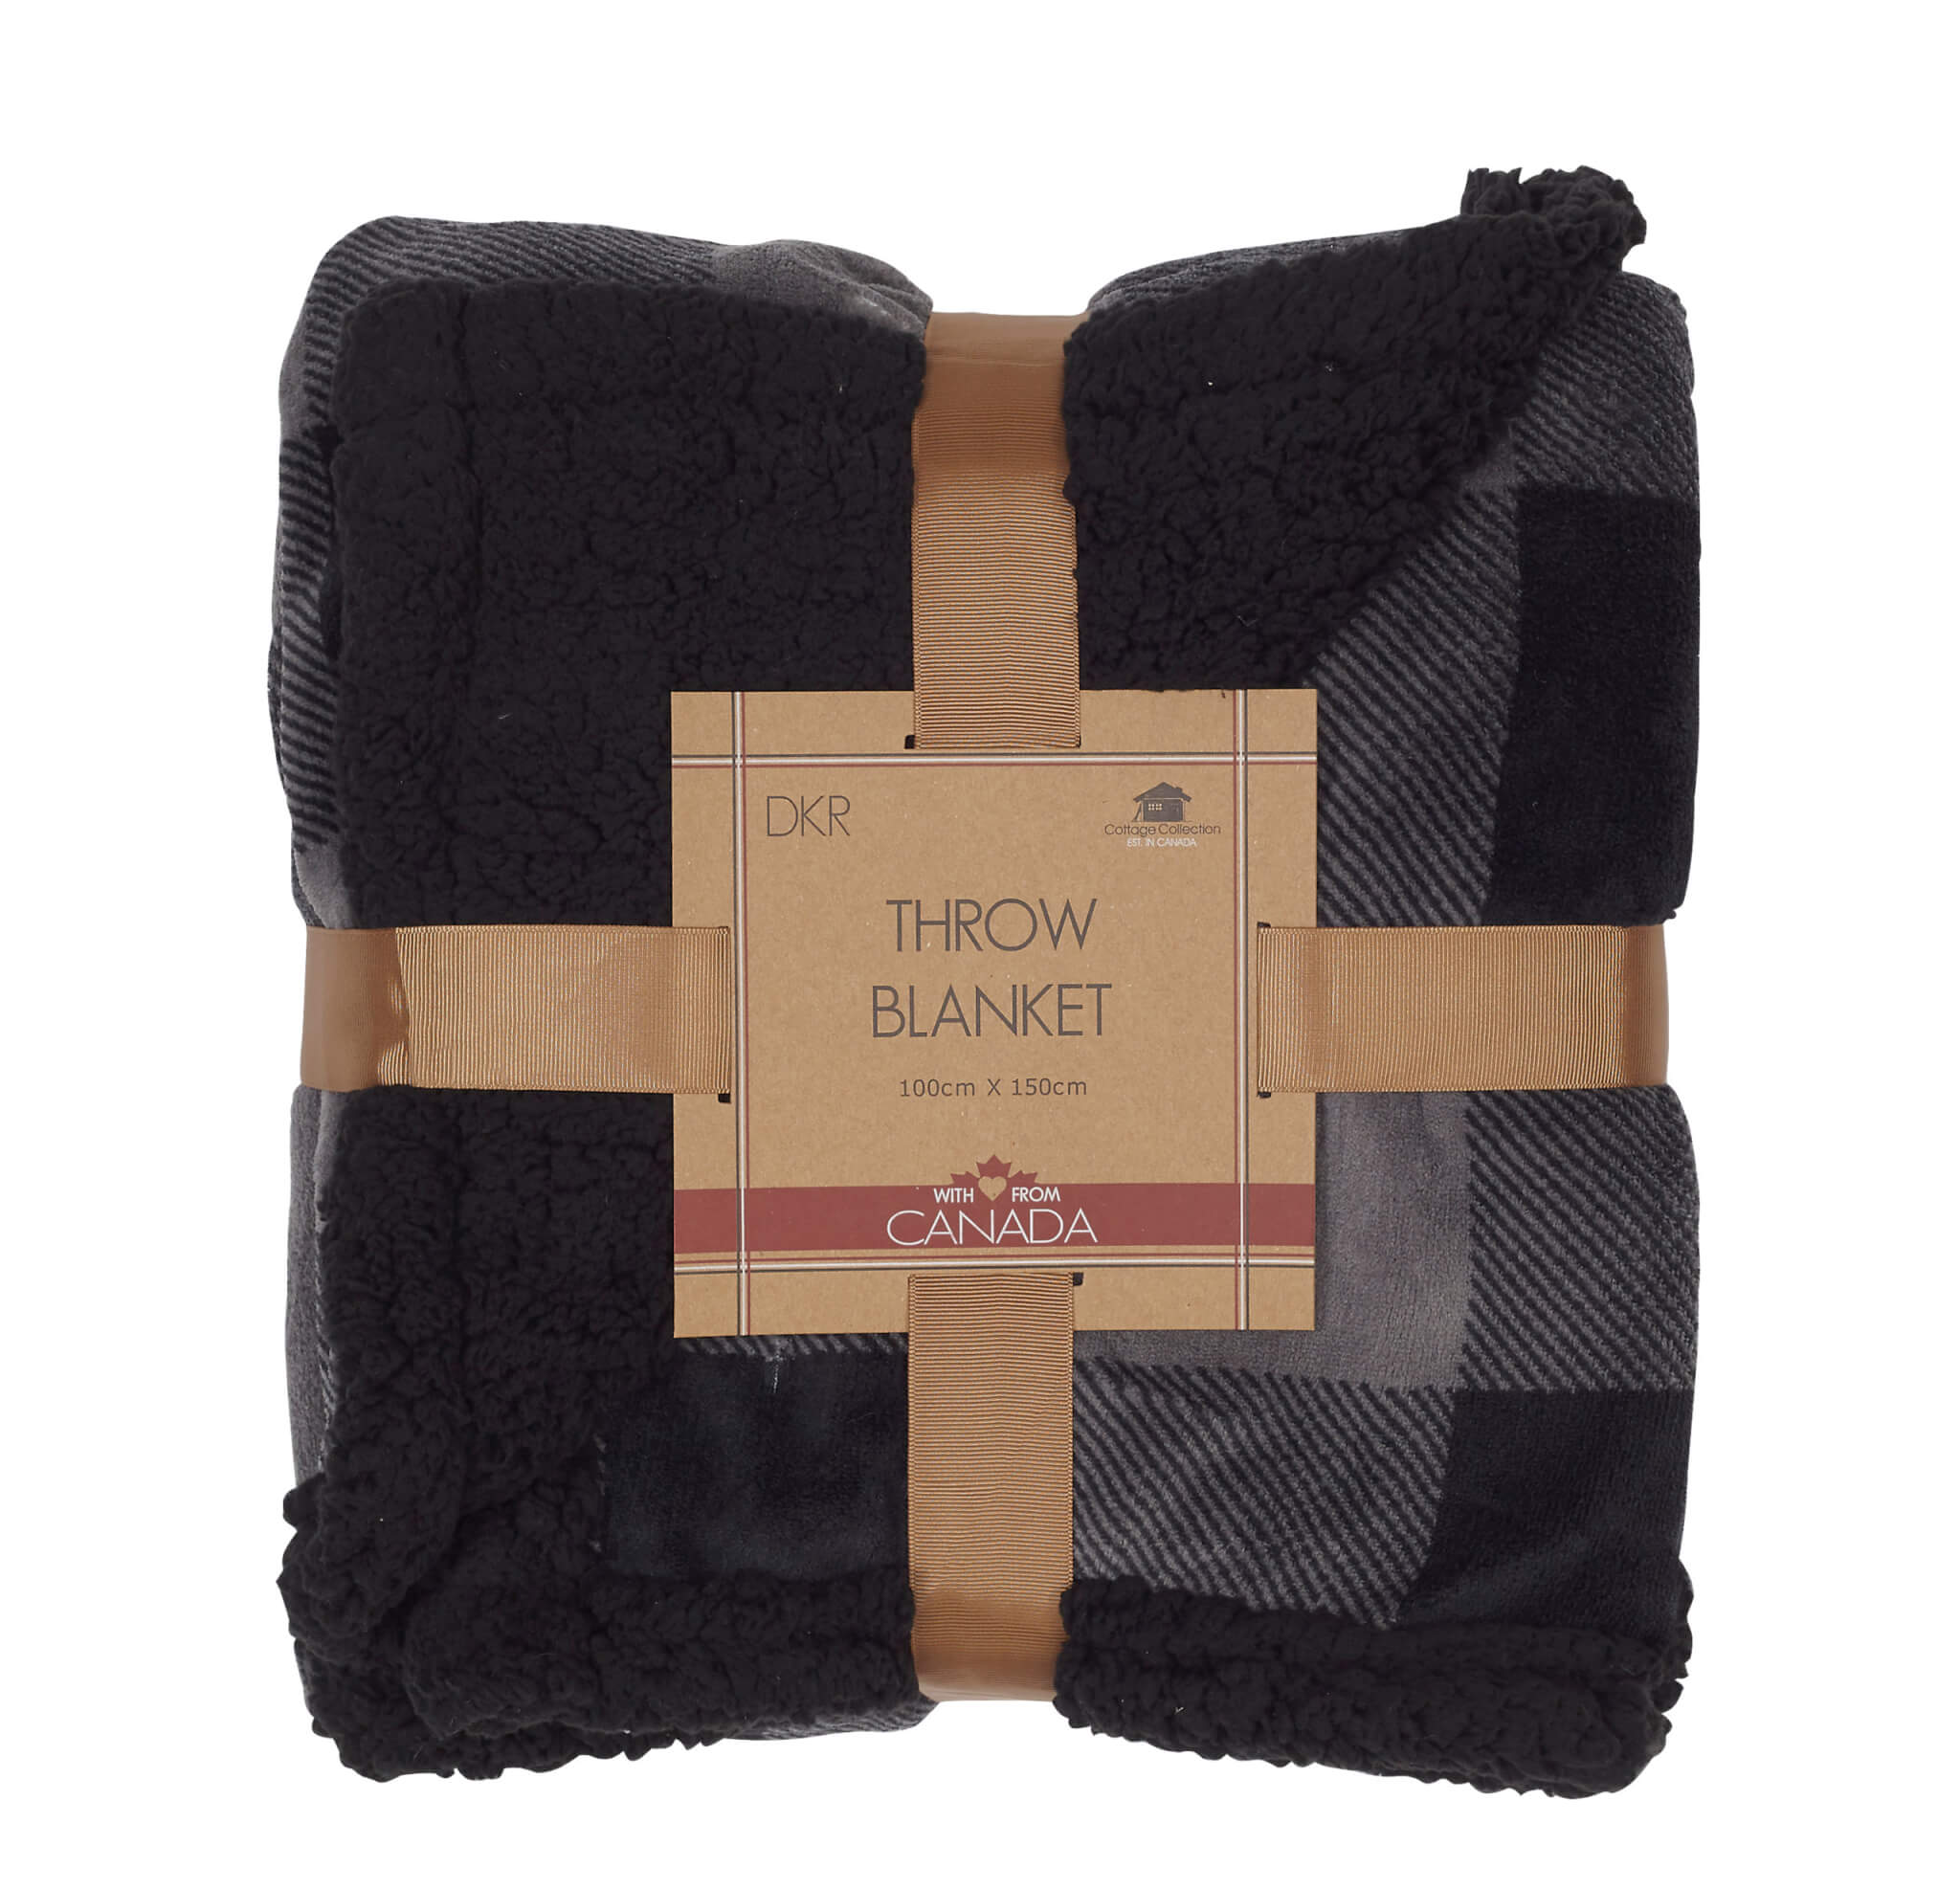 Buffalo Check Throw Blanket - DKR & Company Apparel / Clothes Out Trading